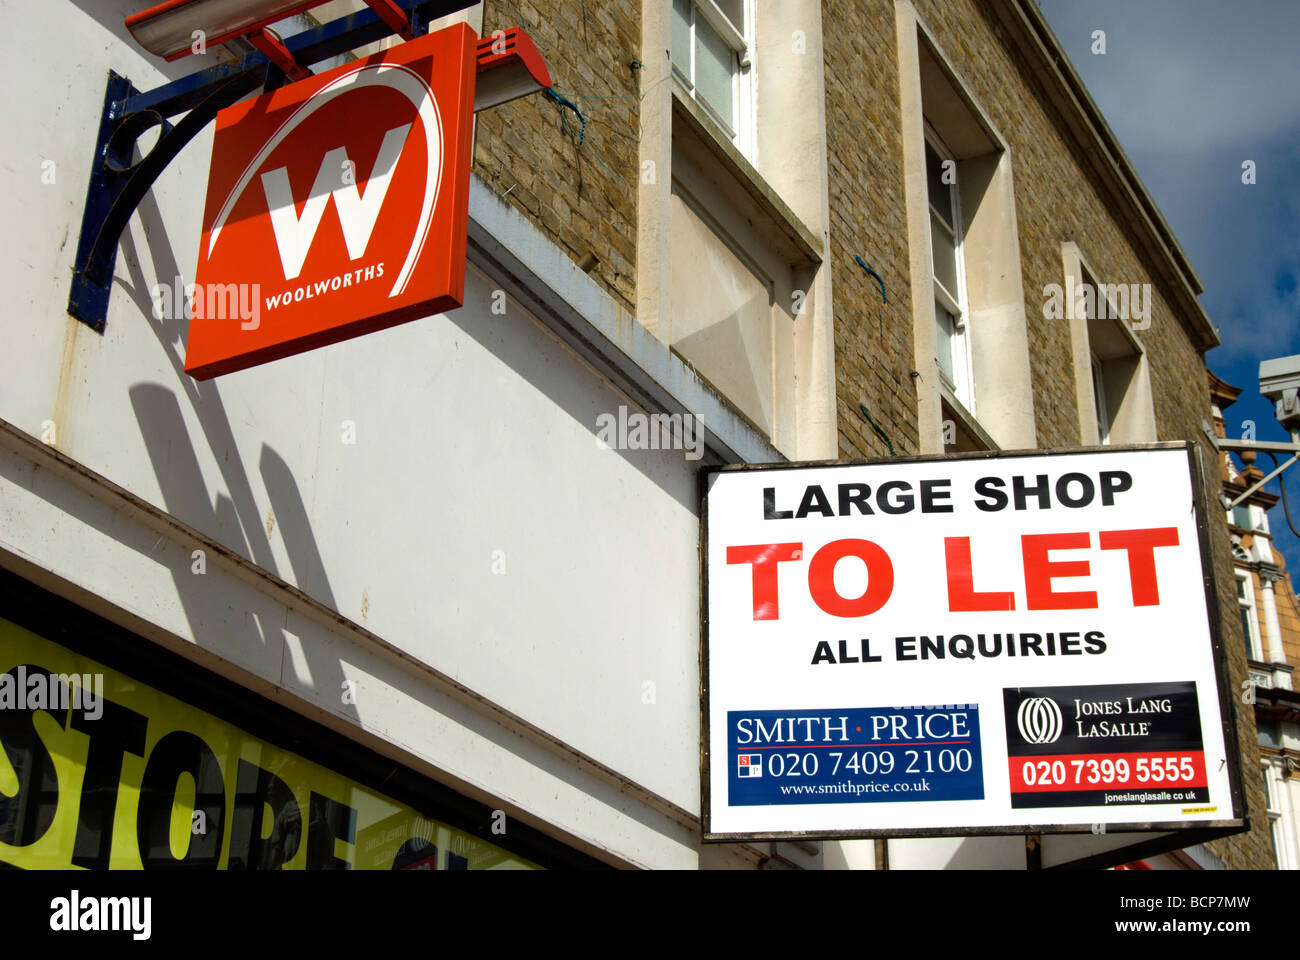 large shop to let sign at a branch of the former woolworths store in kingston upon thames, surrey, england Stock Photo